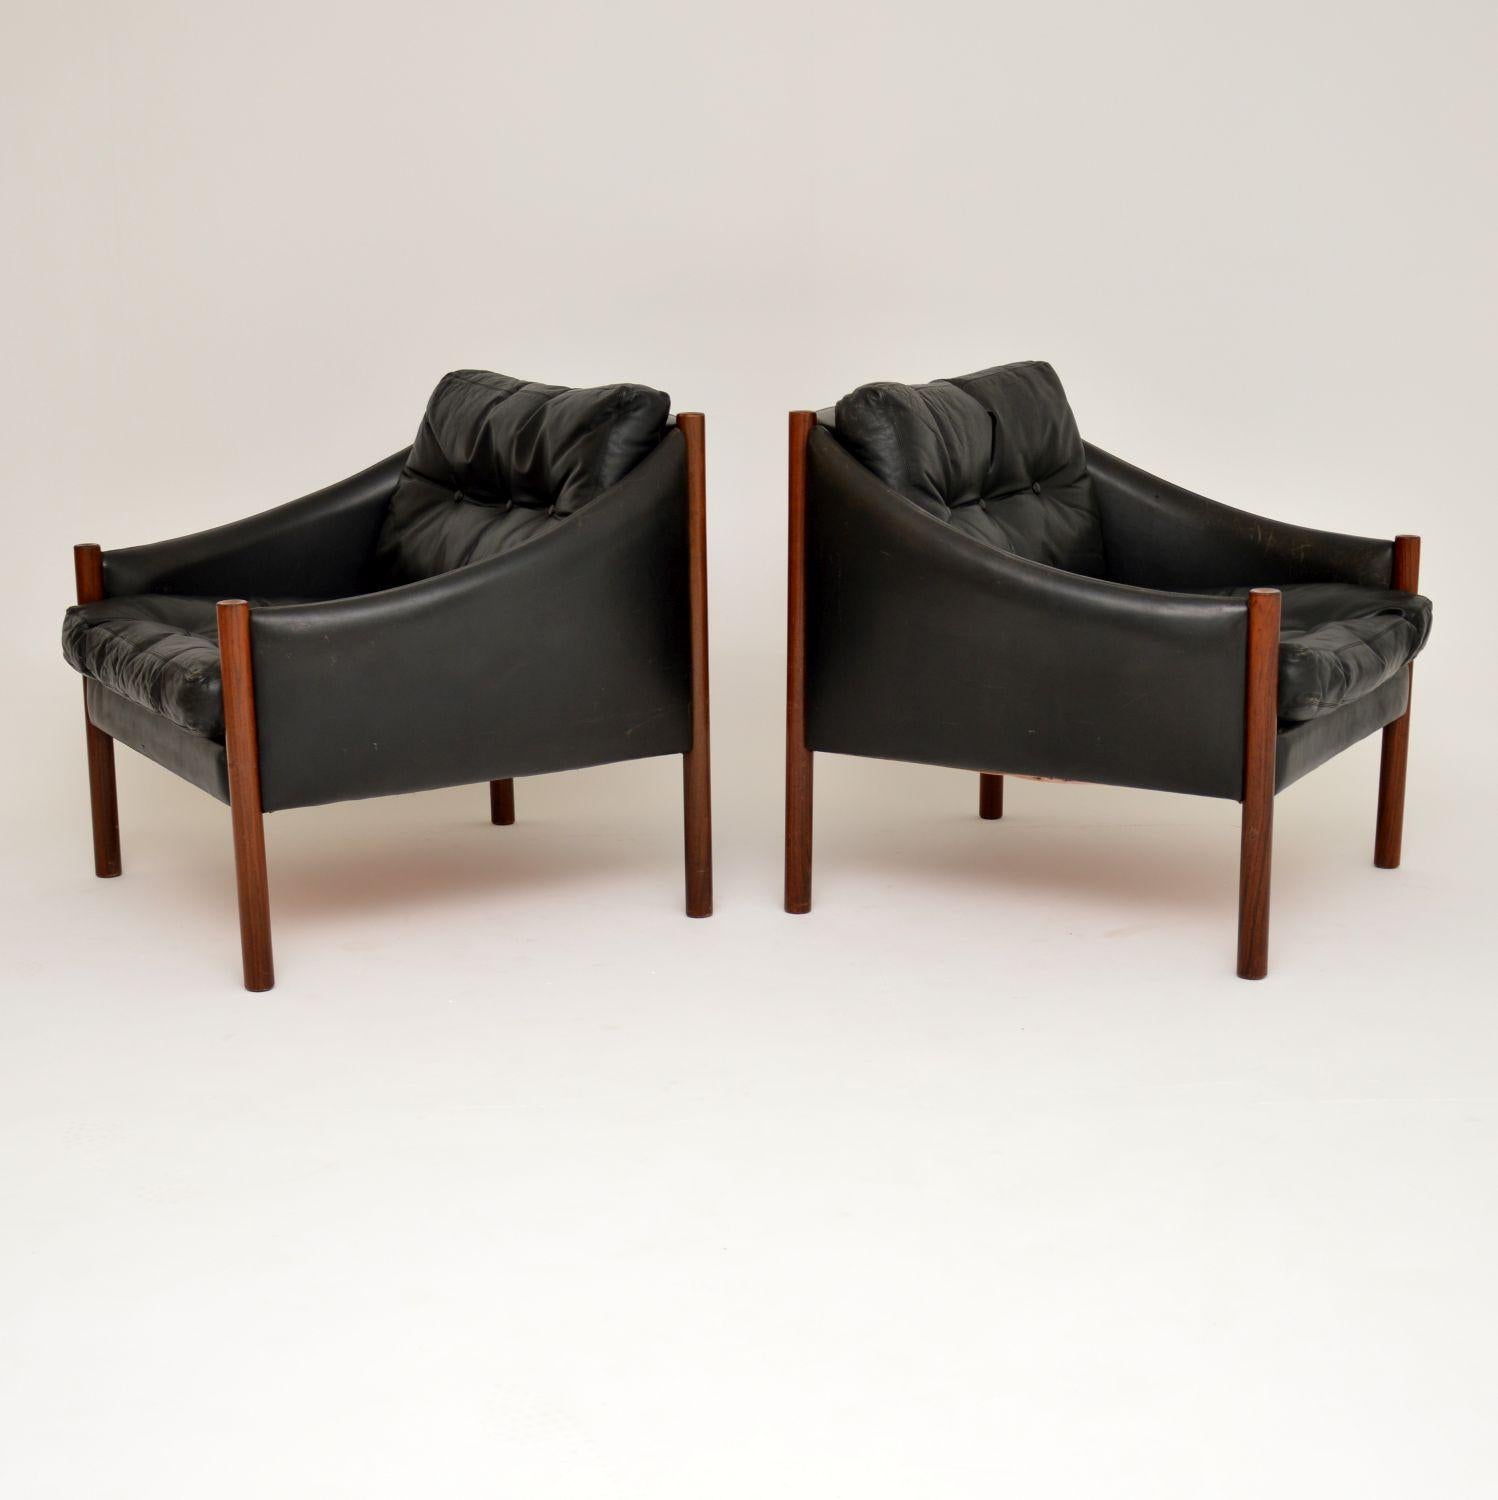 This stylish and extremely comfortable pair of armchairs were made in Denmark in the 1960s. They are beautifully made from black leather and solid wood, the quality is outstanding. They are in lovely vintage condition, the black leather is thick and